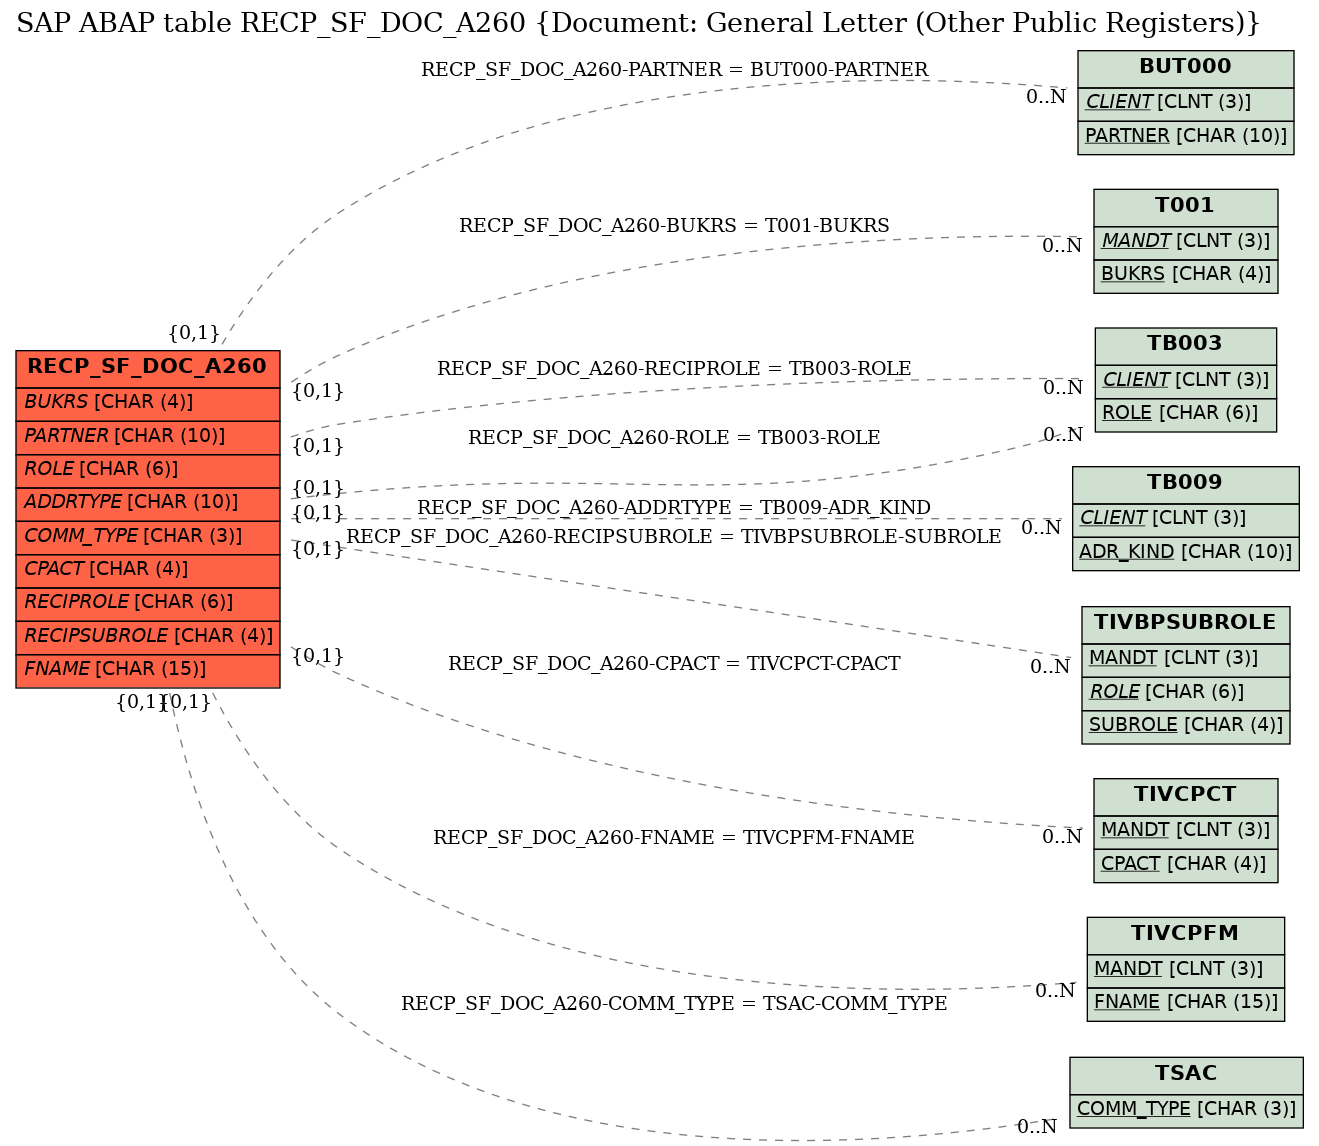 E-R Diagram for table RECP_SF_DOC_A260 (Document: General Letter (Other Public Registers))